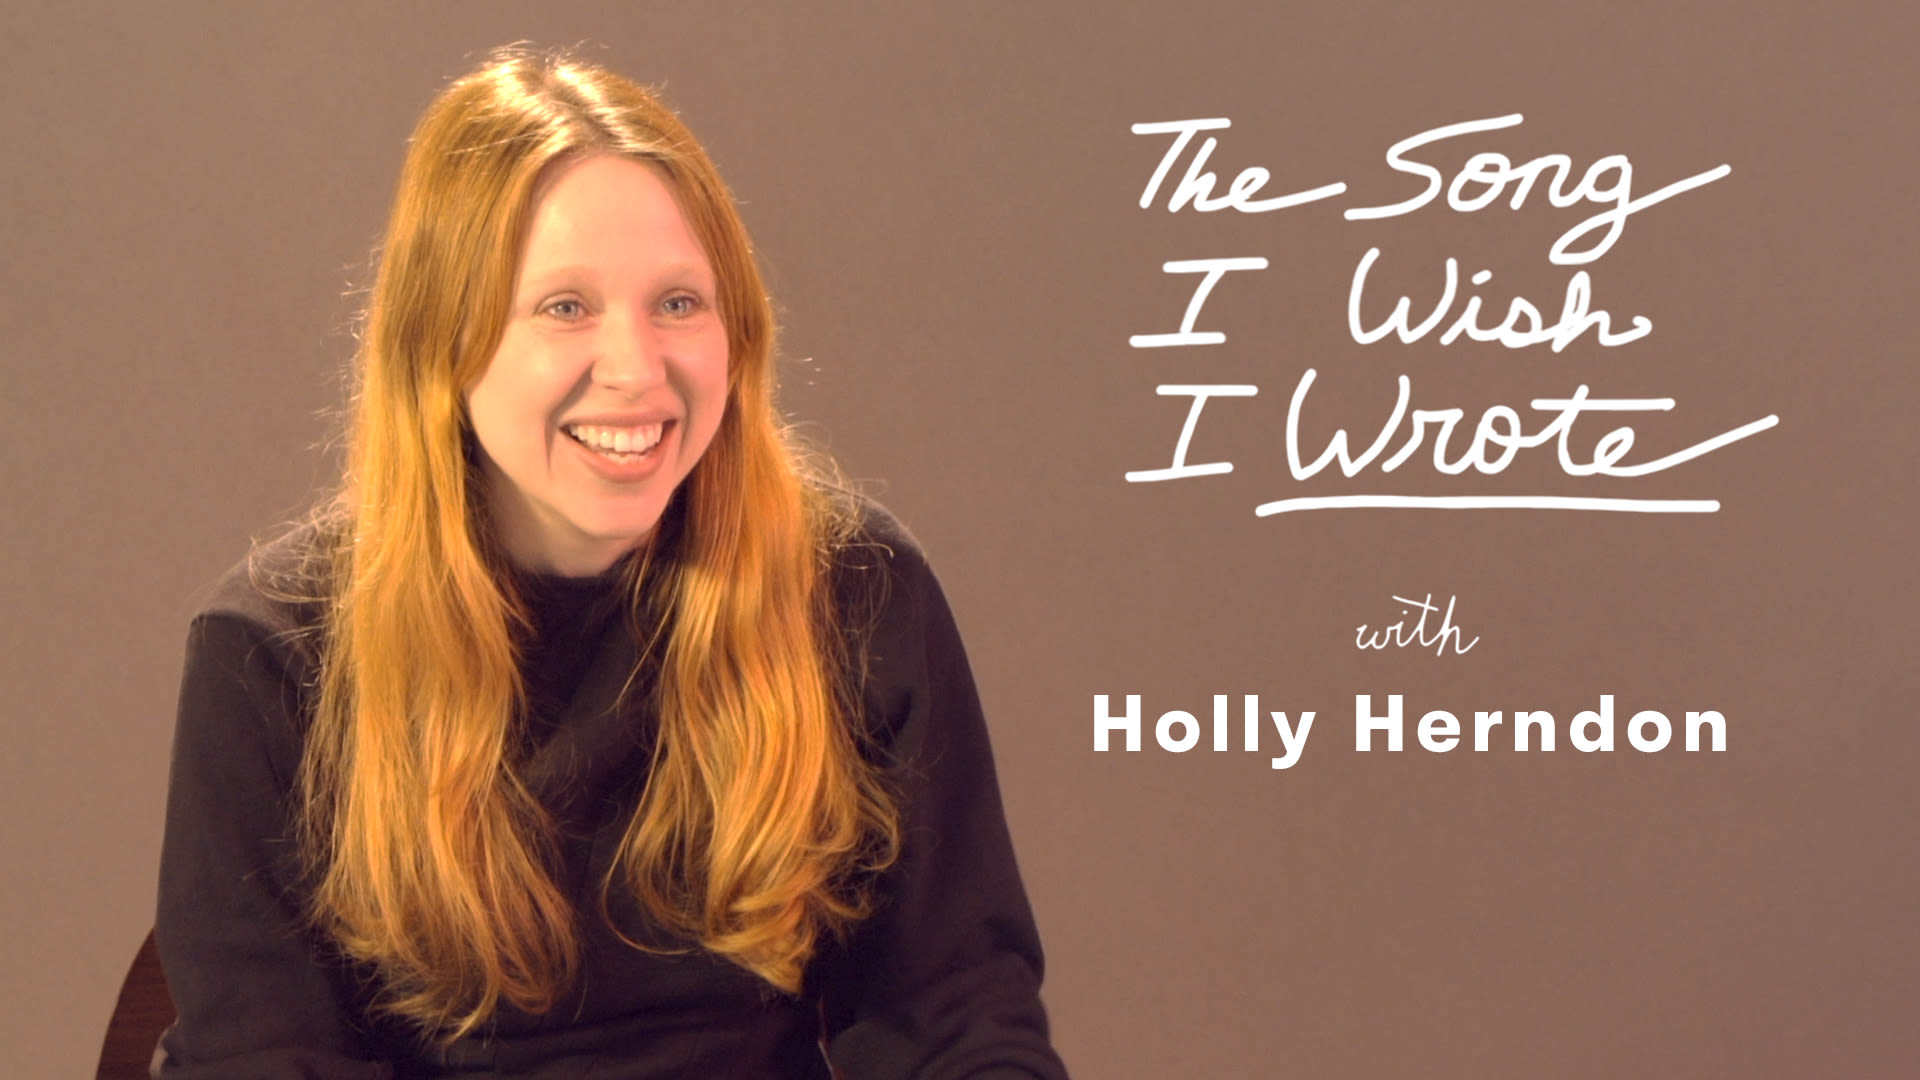 Holly Herndon Band. She Wishes.